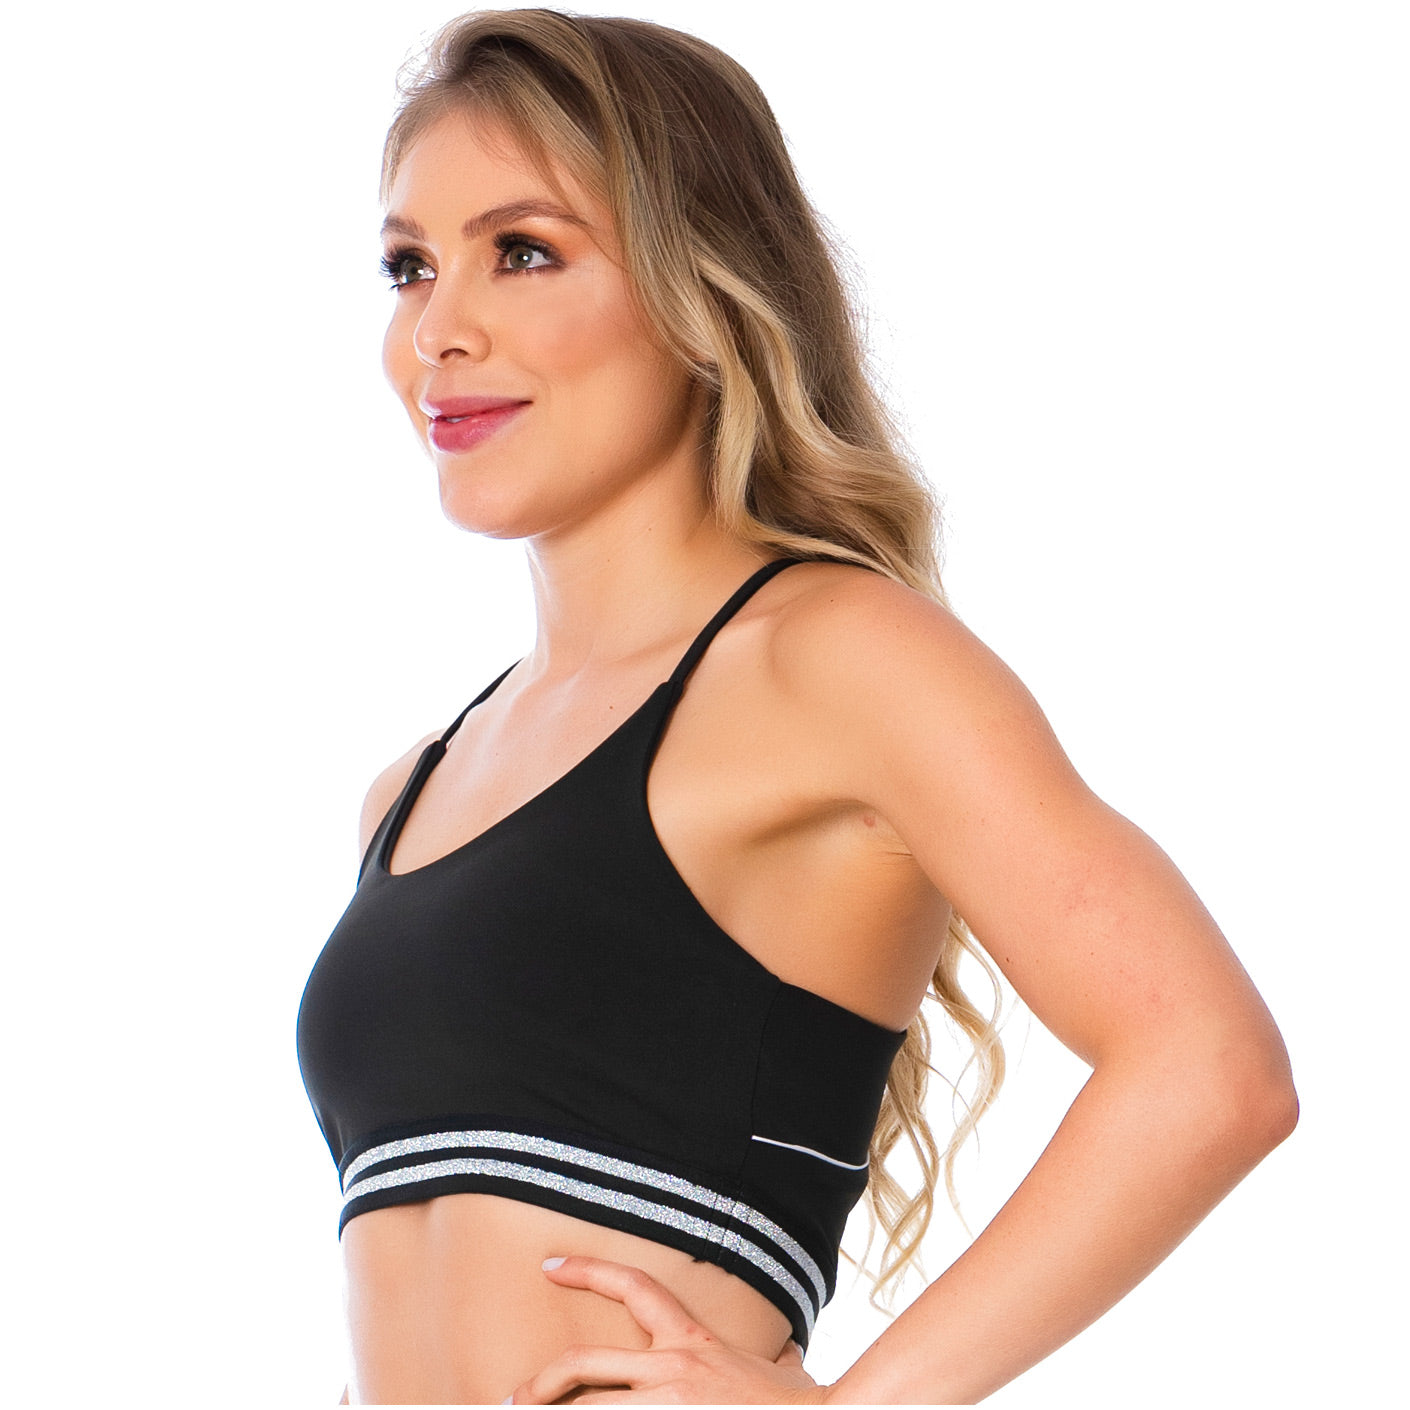 Flexmee 902053 | A sports bra in black with a racerback design | Chica Sexy